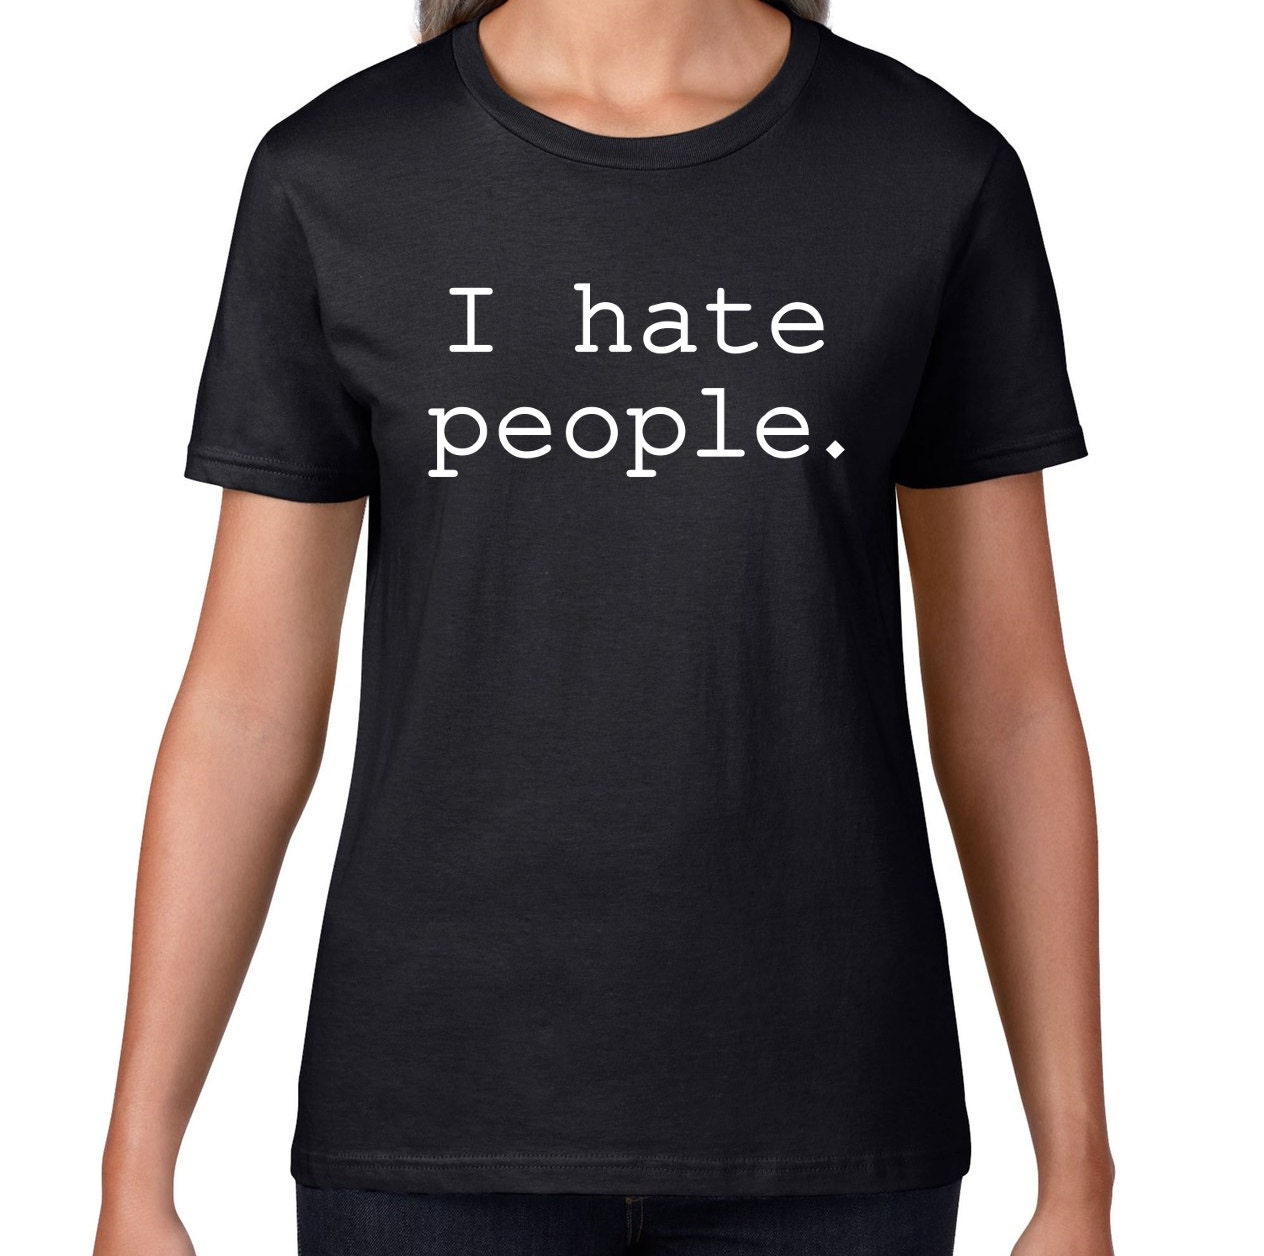 Funny T Shirt I Hate People T Shirt Funny by NaughtyCatApparel